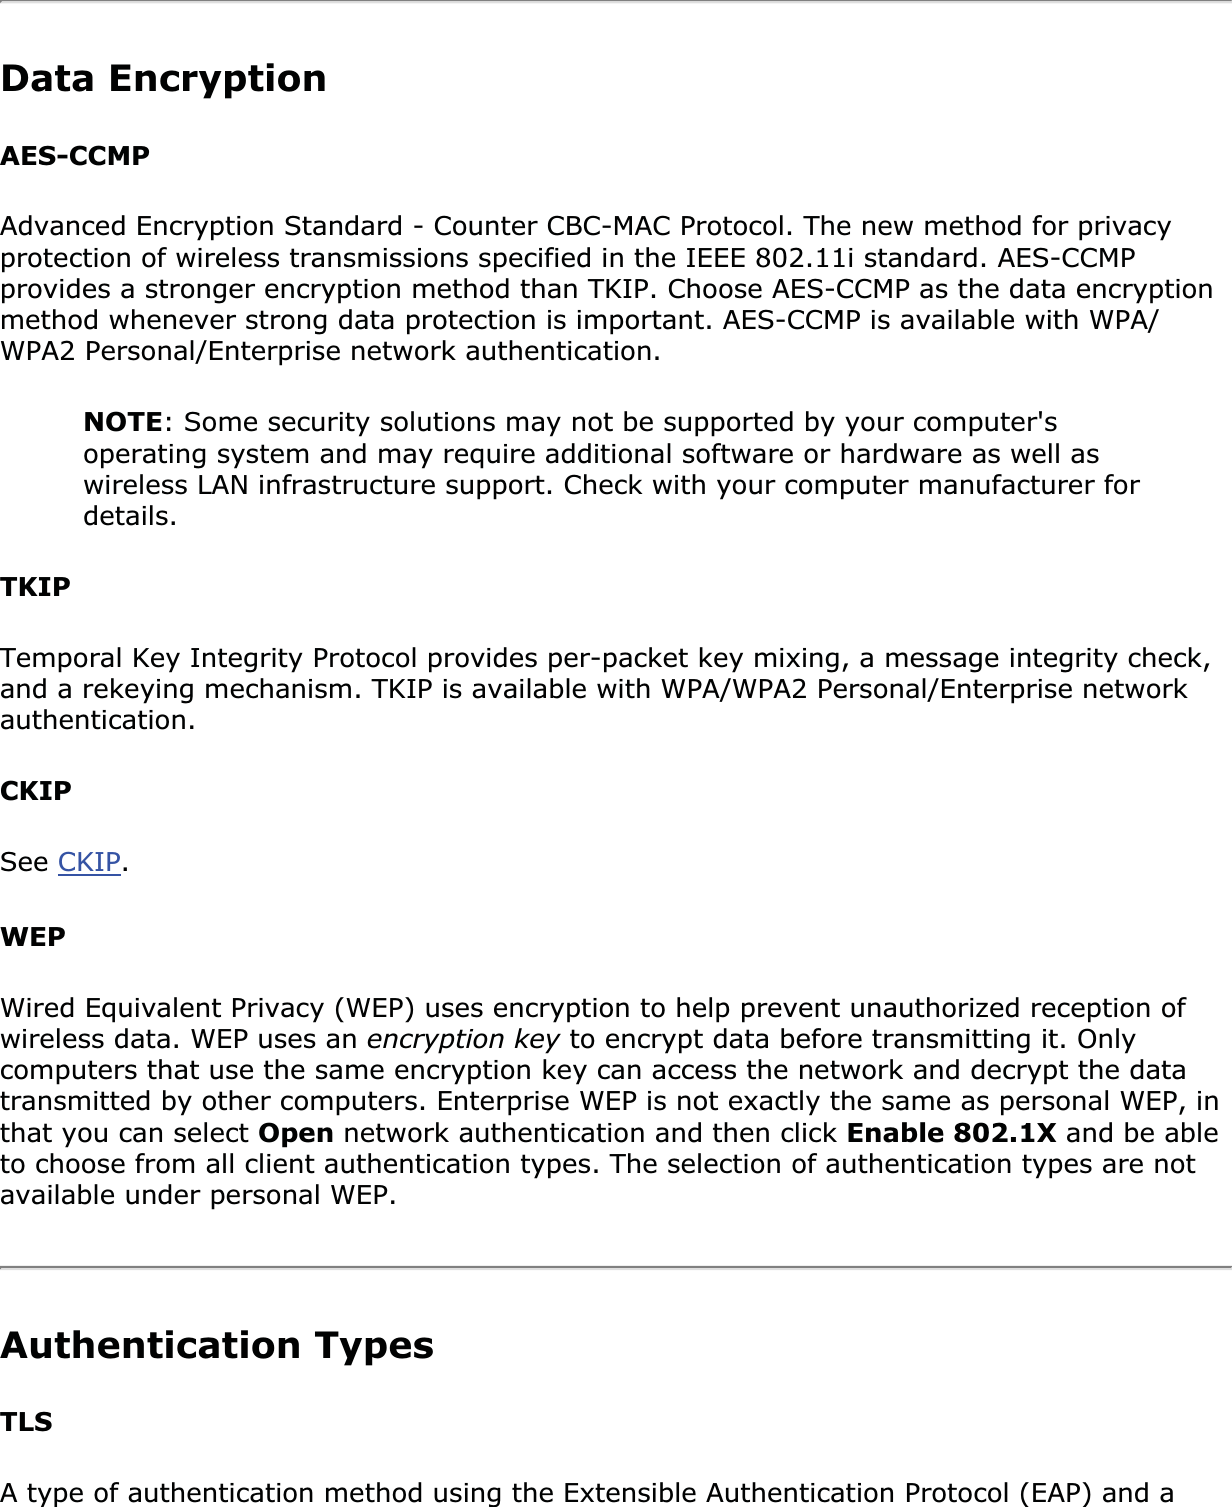 Data EncryptionAES-CCMPAdvanced Encryption Standard - Counter CBC-MAC Protocol. The new method for privacy protection of wireless transmissions specified in the IEEE 802.11i standard. AES-CCMP provides a stronger encryption method than TKIP. Choose AES-CCMP as the data encryption method whenever strong data protection is important. AES-CCMP is available with WPA/WPA2 Personal/Enterprise network authentication.NOTE: Some security solutions may not be supported by your computer&apos;s operating system and may require additional software or hardware as well as wireless LAN infrastructure support. Check with your computer manufacturer for details.TKIPTemporal Key Integrity Protocol provides per-packet key mixing, a message integrity check, and a rekeying mechanism. TKIP is available with WPA/WPA2 Personal/Enterprise network authentication.CKIPSee CKIP.WEPWired Equivalent Privacy (WEP) uses encryption to help prevent unauthorized reception of wireless data. WEP uses an encryption key to encrypt data before transmitting it. Only computers that use the same encryption key can access the network and decrypt the data transmitted by other computers. Enterprise WEP is not exactly the same as personal WEP, in that you can select Open network authentication and then click Enable 802.1X and be able to choose from all client authentication types. The selection of authentication types are not available under personal WEP.Authentication Types TLSA type of authentication method using the Extensible Authentication Protocol (EAP) and a 